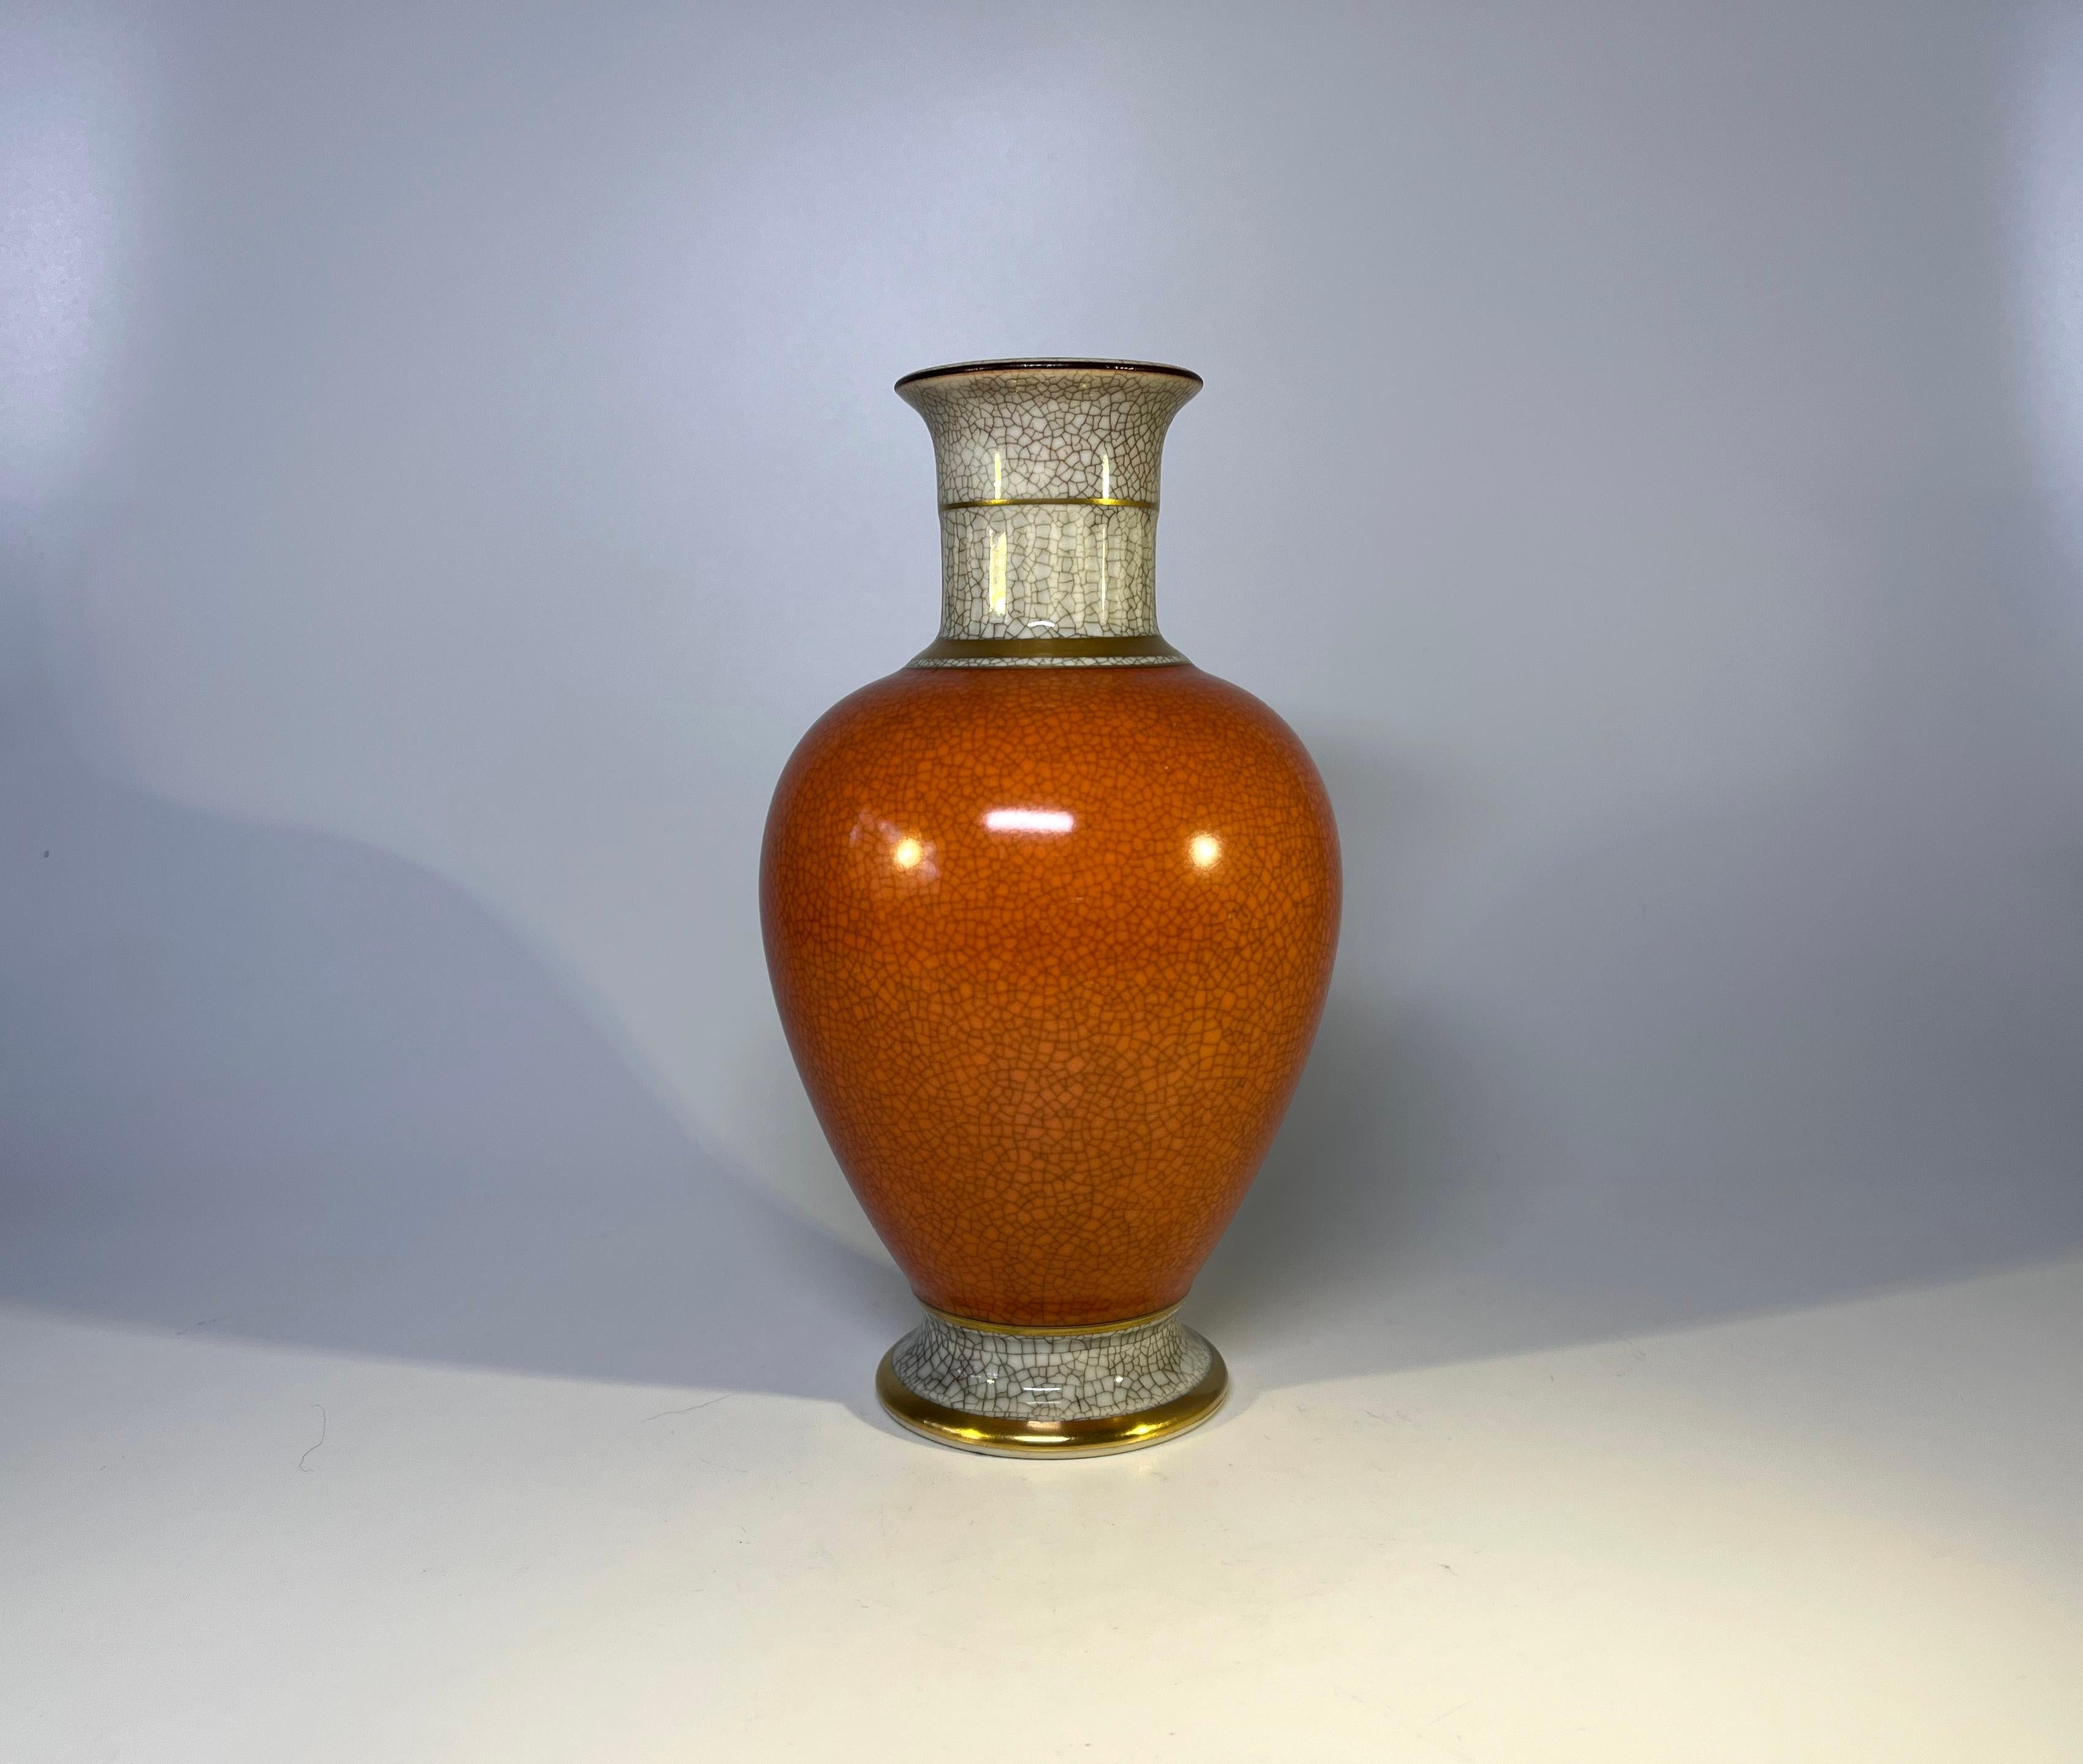 Elegant terracotta orange and grey porcelain, Royal Copenhagen crackle glazed vase with gilded banding on neck and base.
Circa 1956
Stamped and numbered 3032
Measures: height 7 inch, diameter 4 inch
Excellent condition.